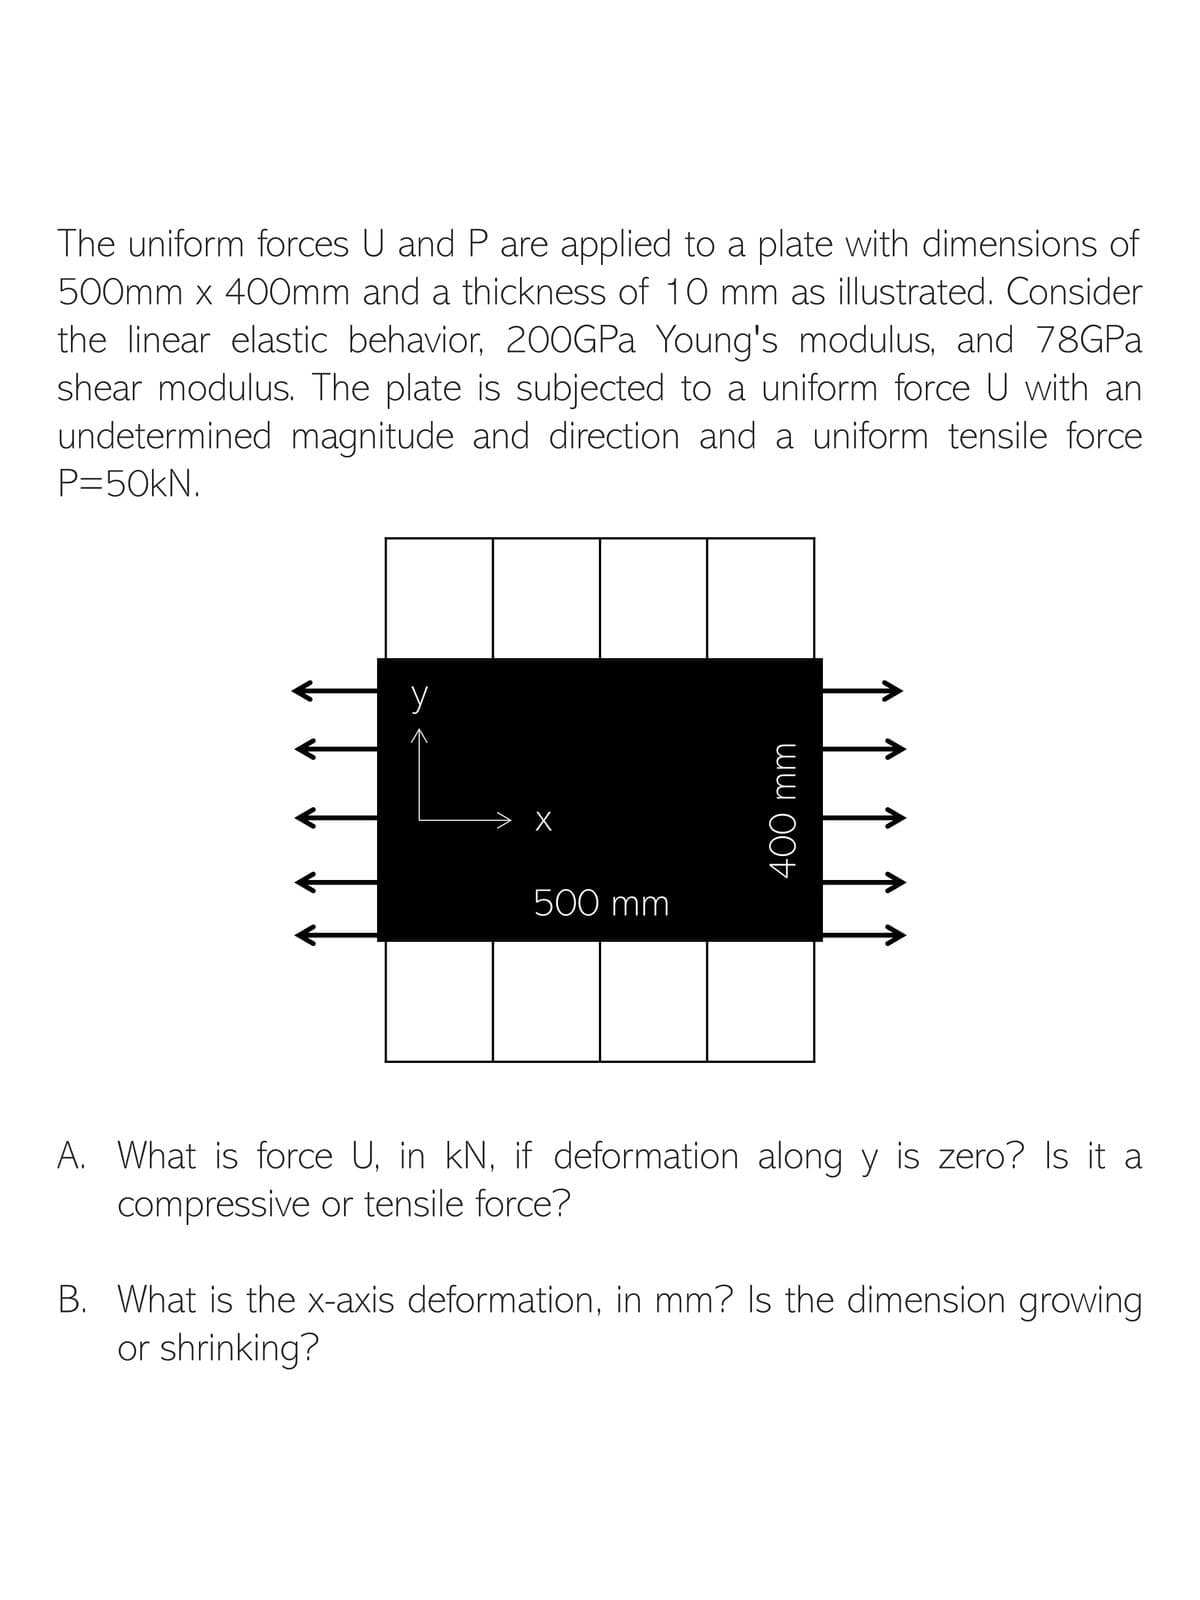 The uniform forces U and P are applied to a plate with dimensions of
500mm x 400mm and a thickness of 10 mm as illustrated. Consider
the linear elastic behavior, 200GPa Young's modulus, and 78GPa
shear modulus. The plate is subjected to a uniform force U with an
undetermined magnitude and direction and a uniform tensile force
P=50KN.
X
500 mm
400 mm
A. What is force U, in kN, if deformation along y is zero? Is it a
compressive or tensile force?
B. What is the x-axis deformation, in mm? Is the dimension growing
or shrinking?